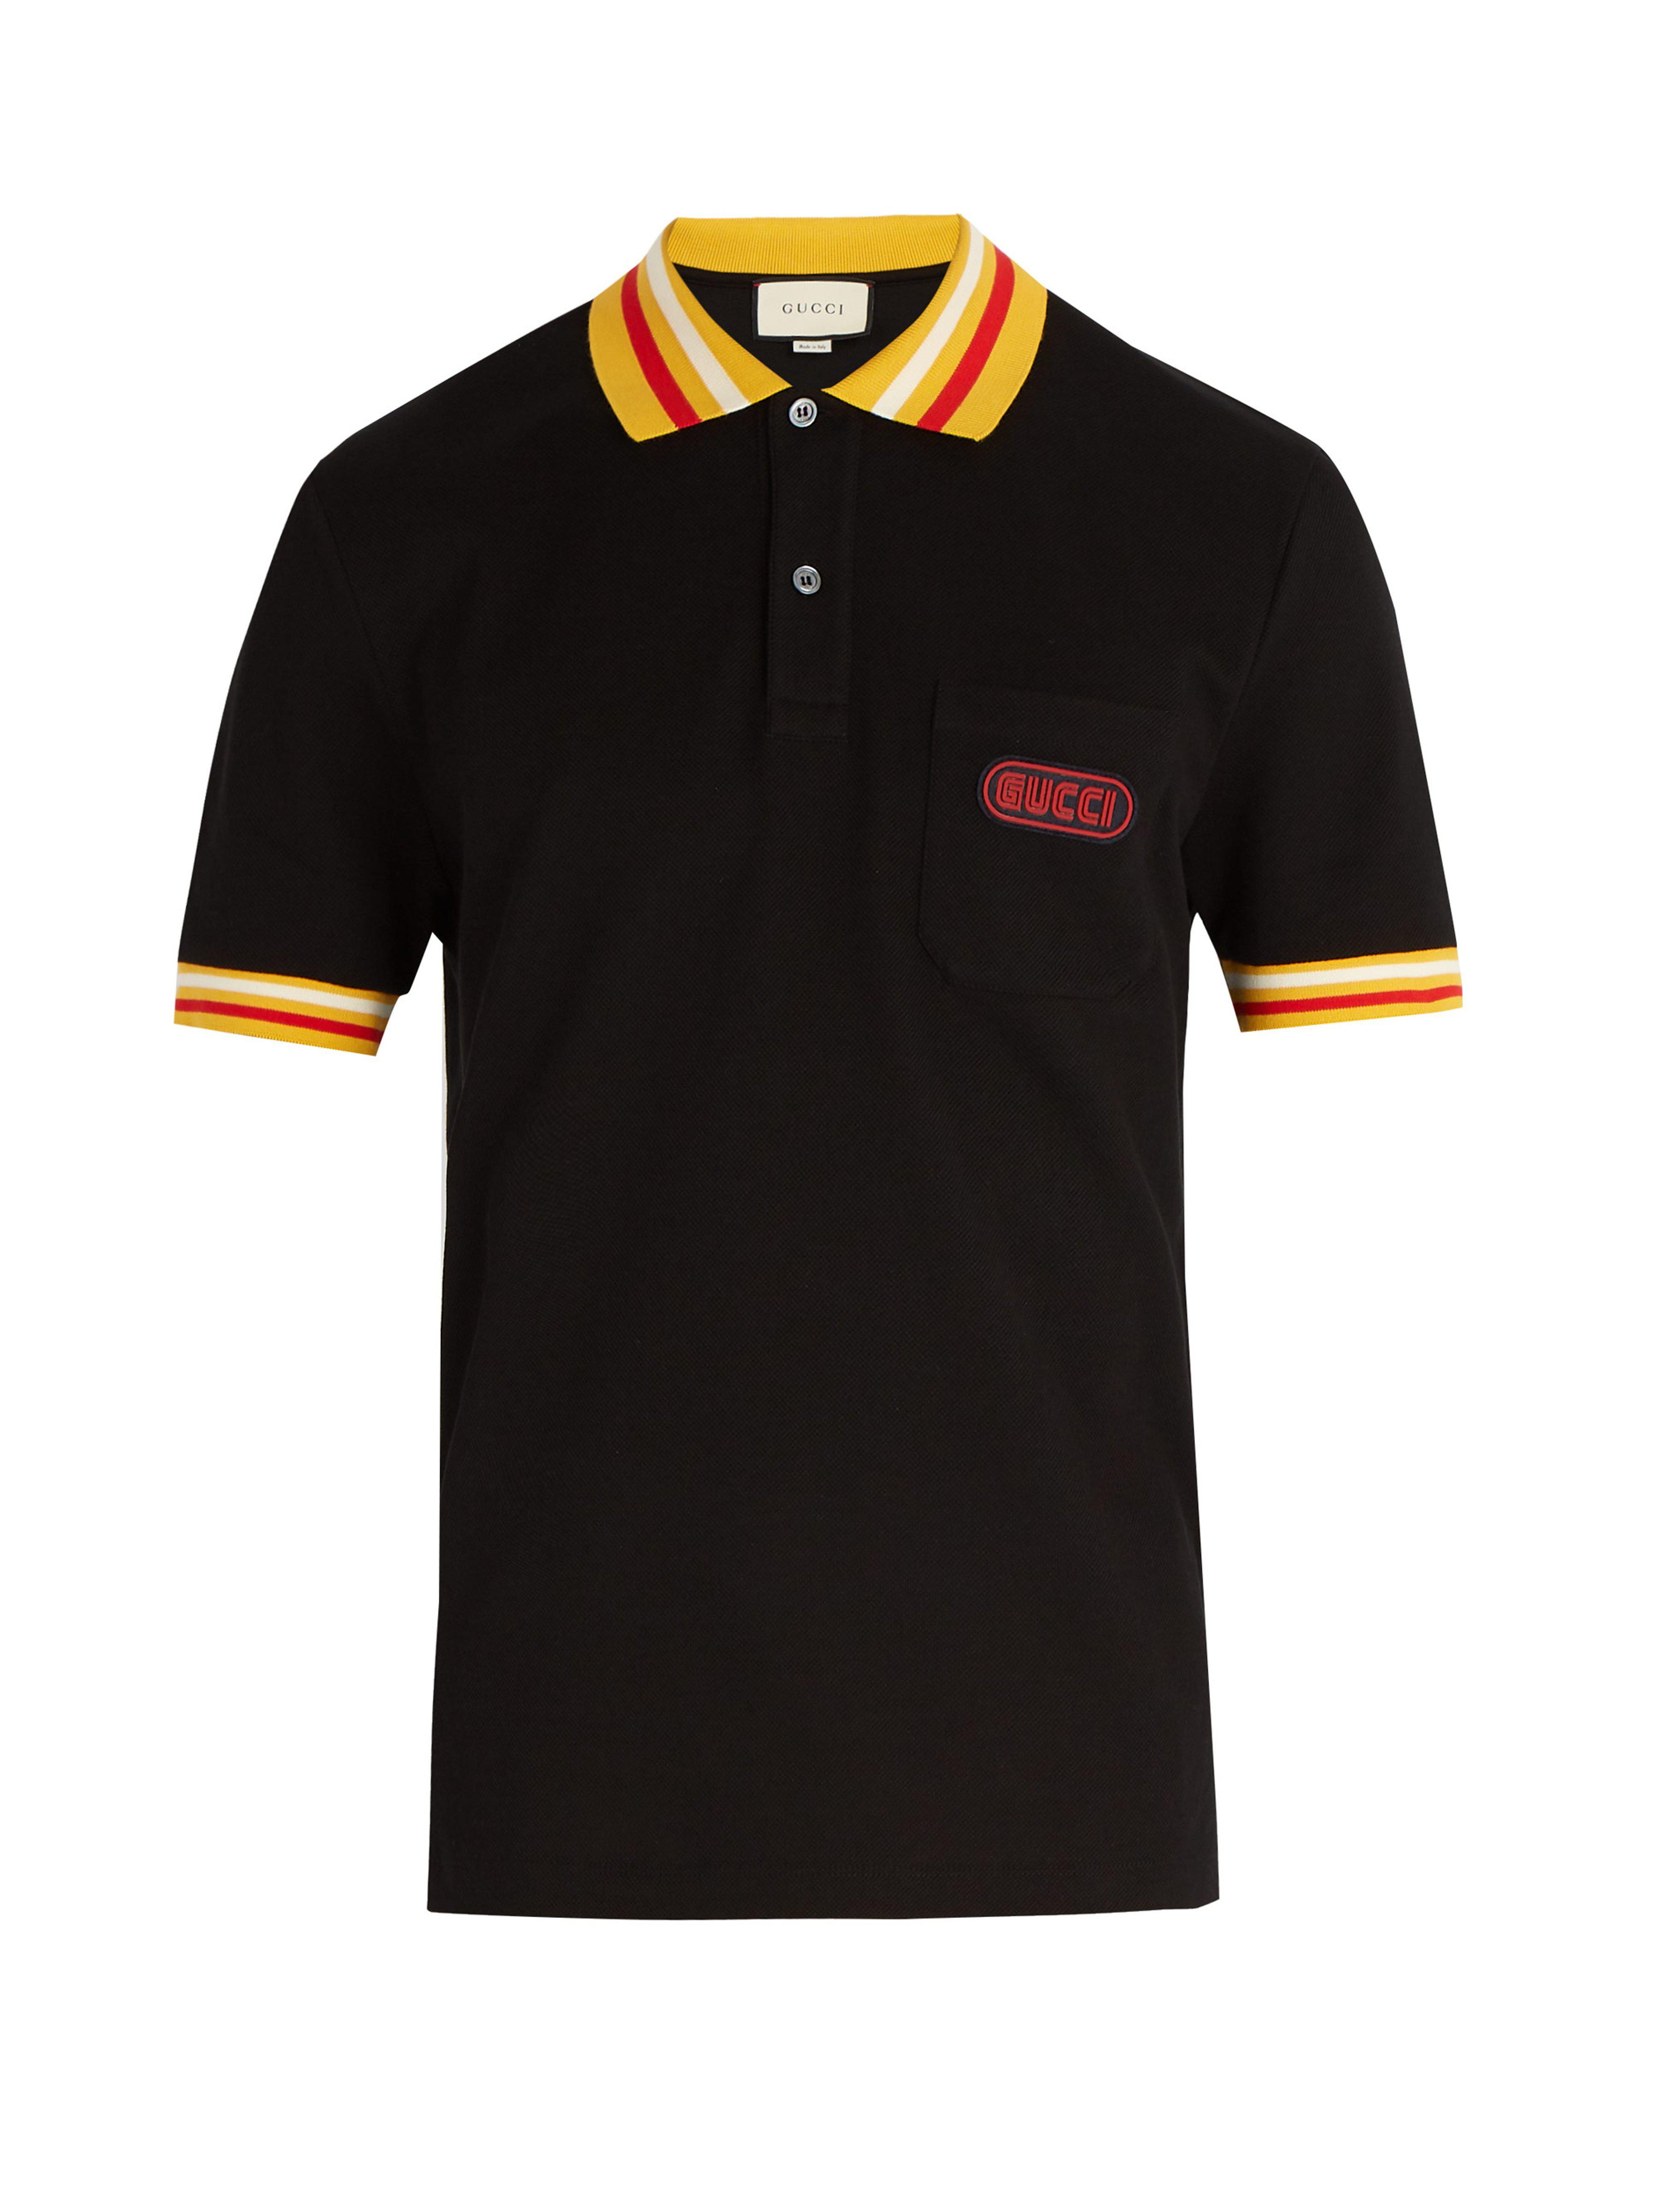 Gucci Cotton Men's Pique-knit Polo Shirt With Contrast Color in Black ...